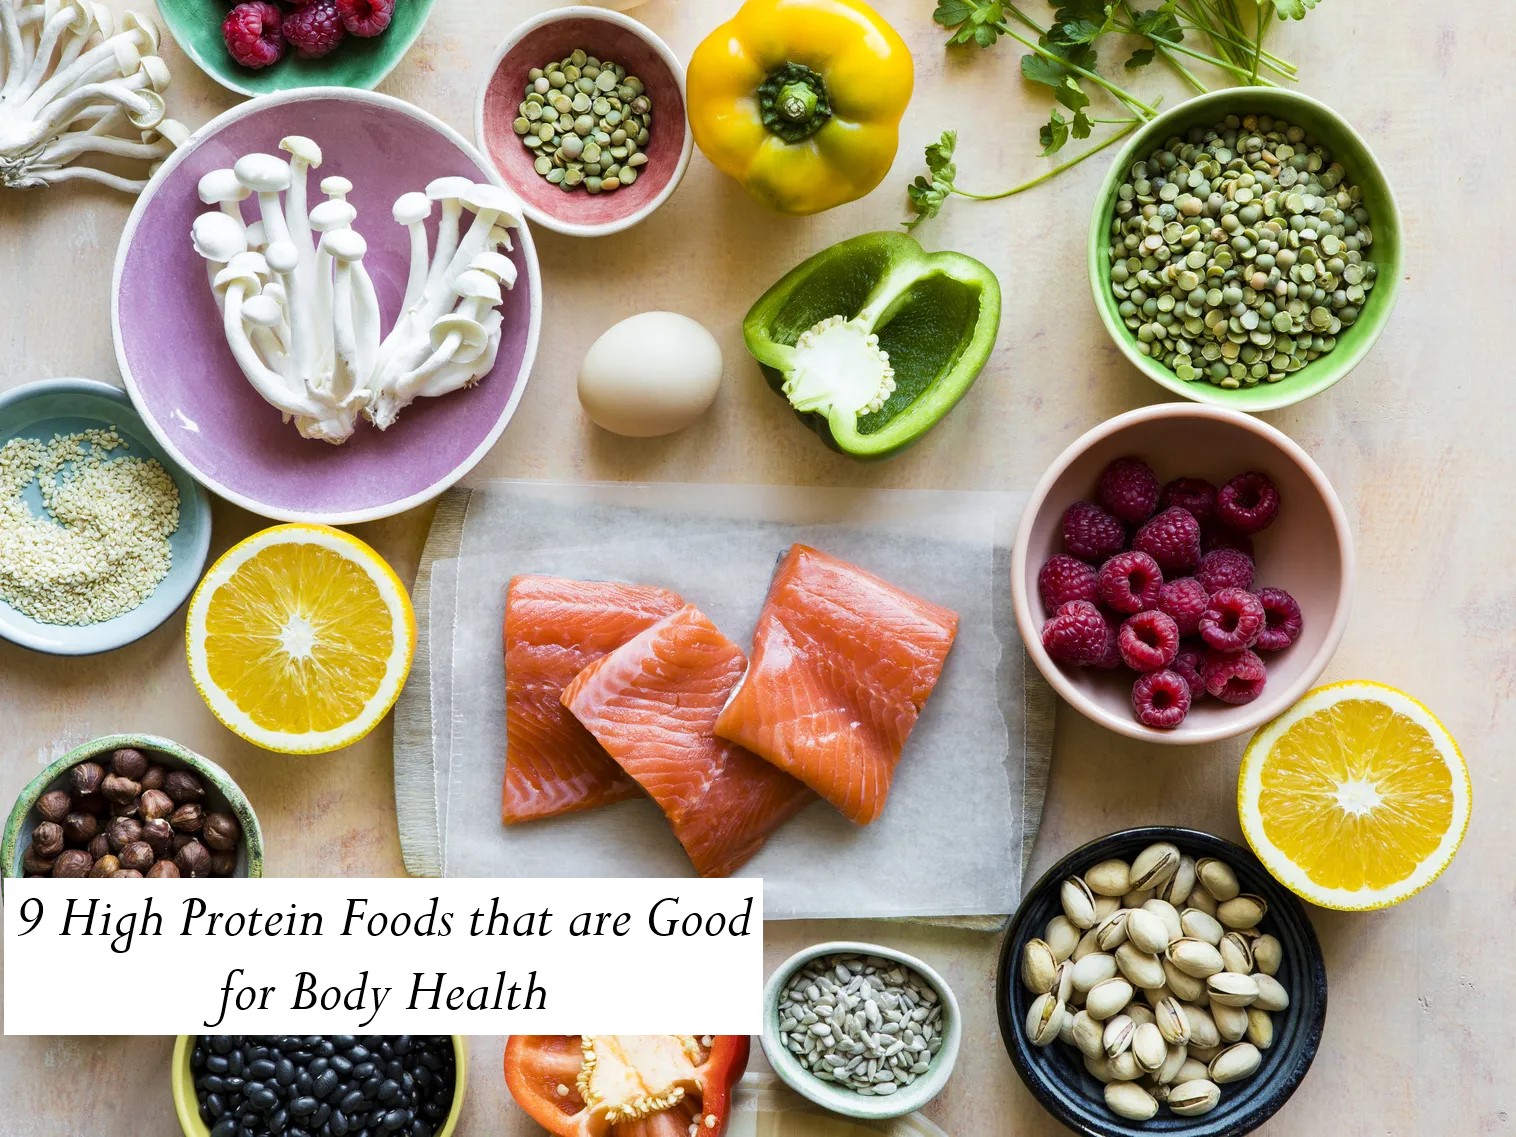 9 High Protein Foods that are Good for Body Health